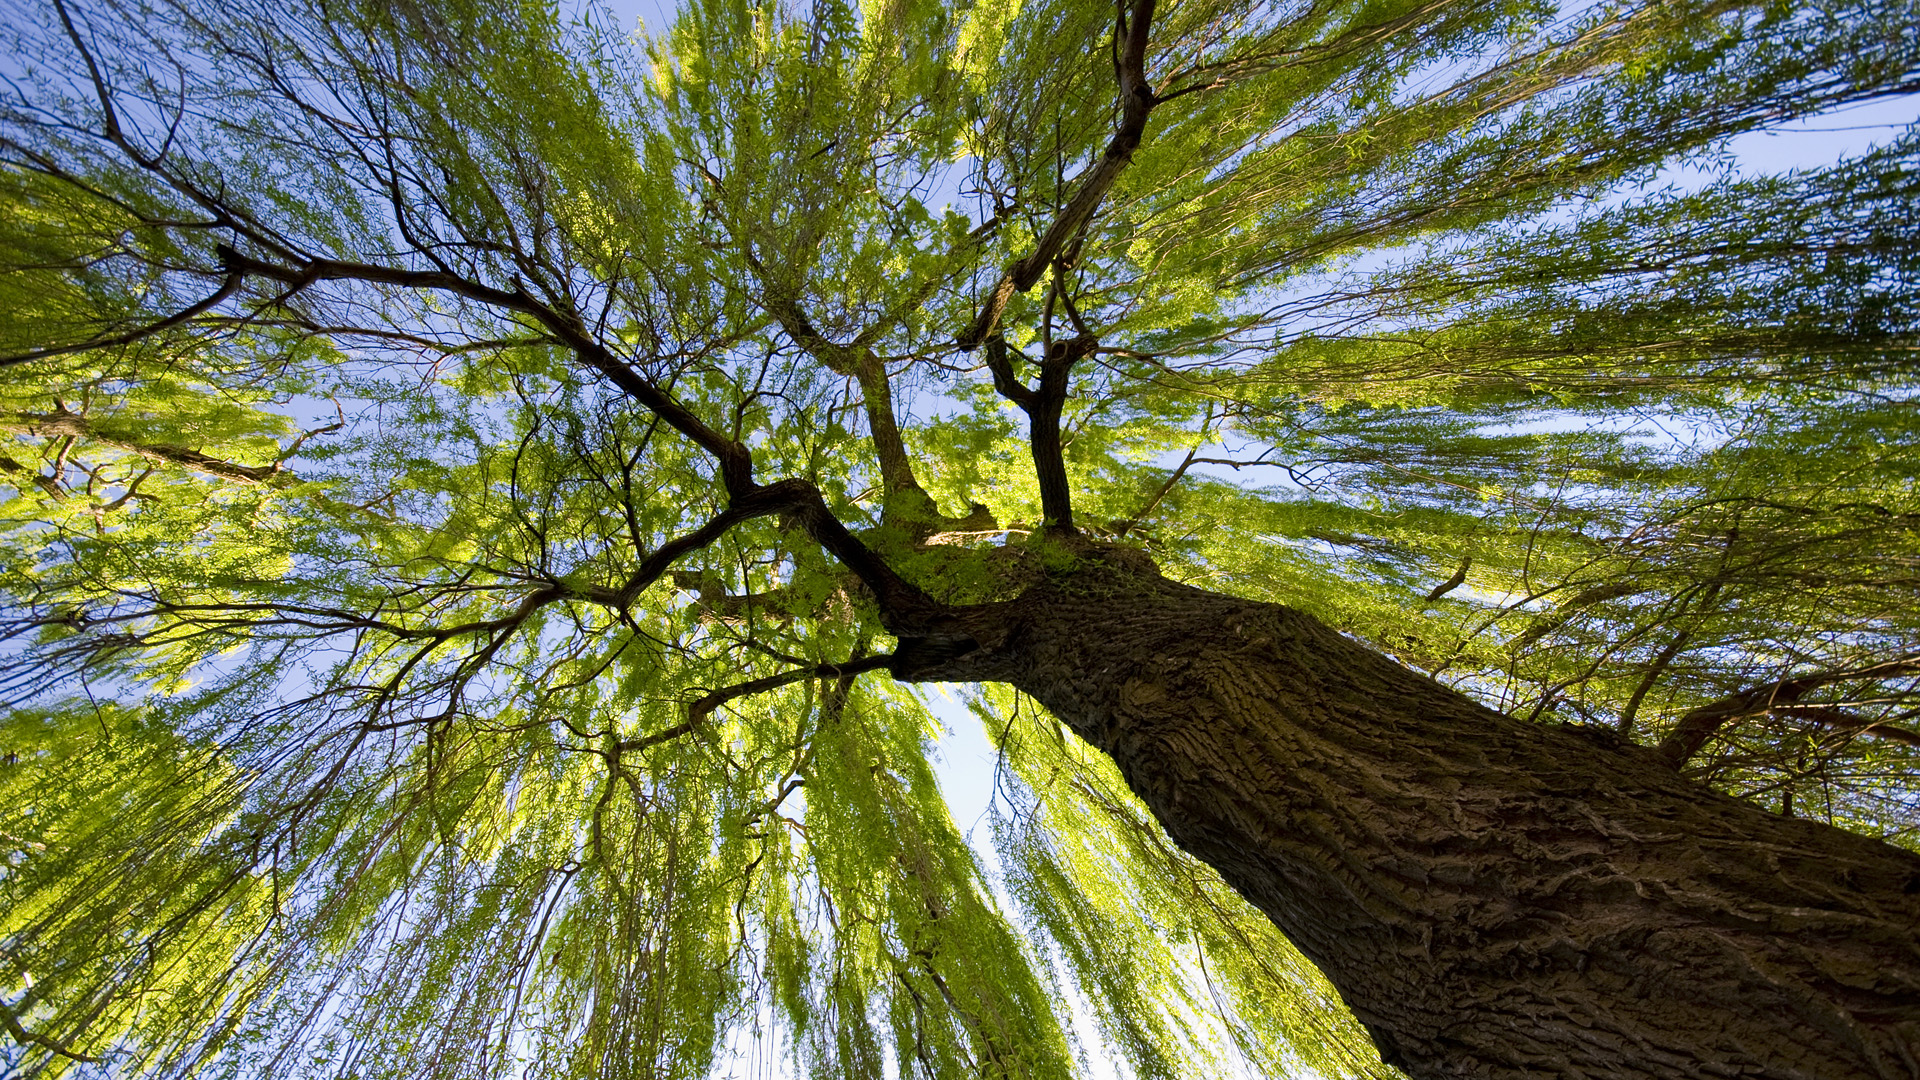 The Majestic Willow - Trees Worms Eye View - HD Wallpaper 